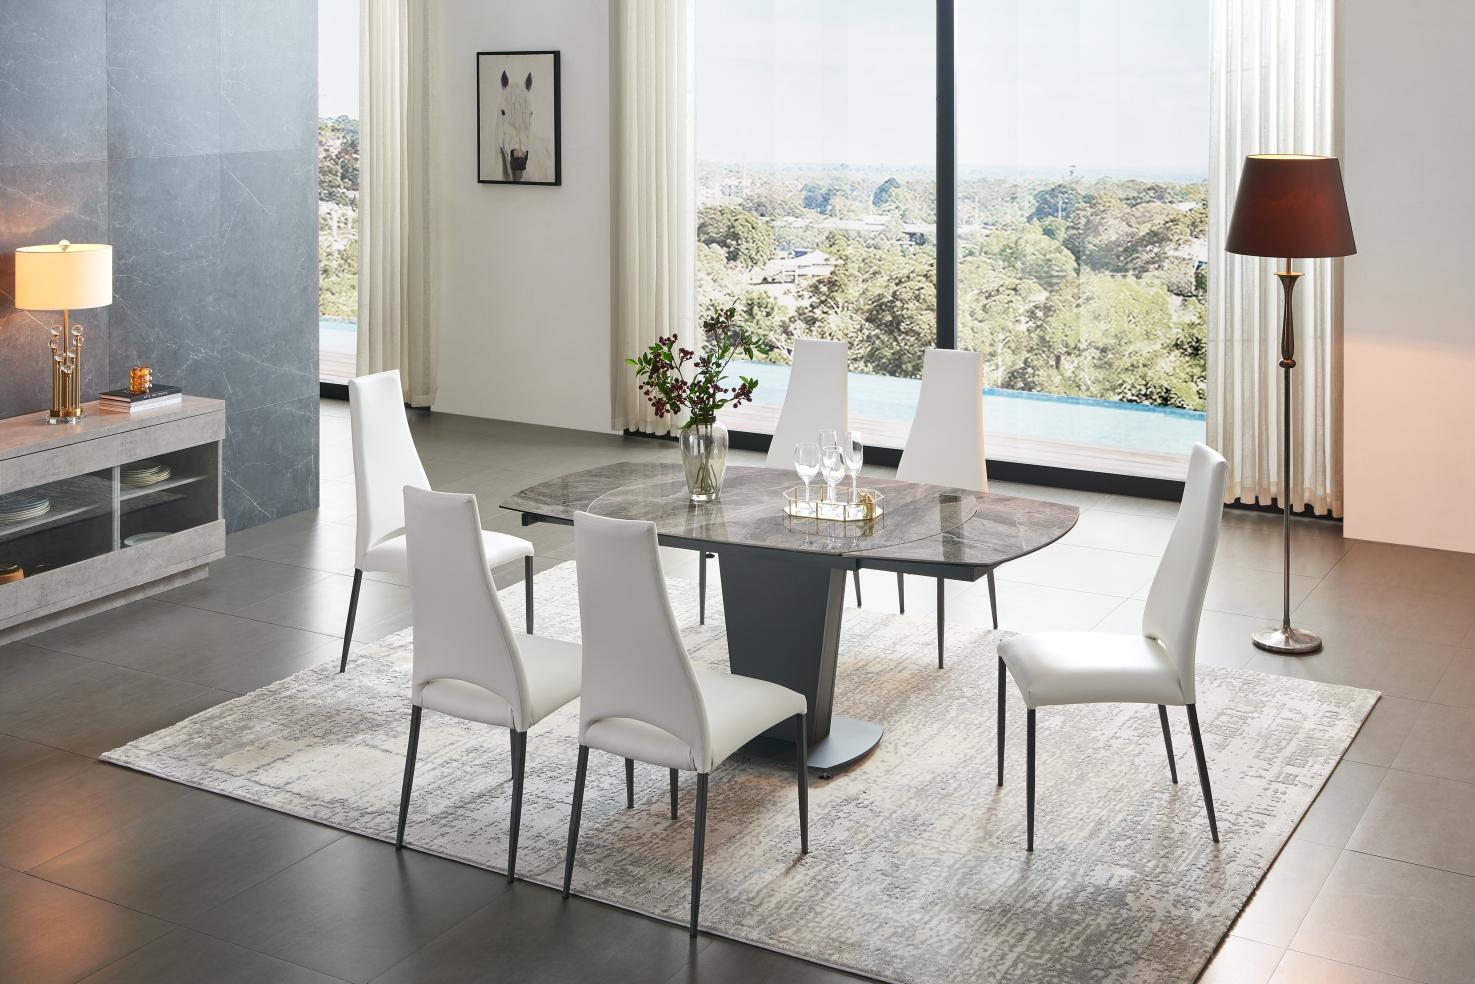 Contemporary Dining Table Set 2417TABLEBROWN 2417TABLEBROWN-5PC in White, Gray Eco Leather